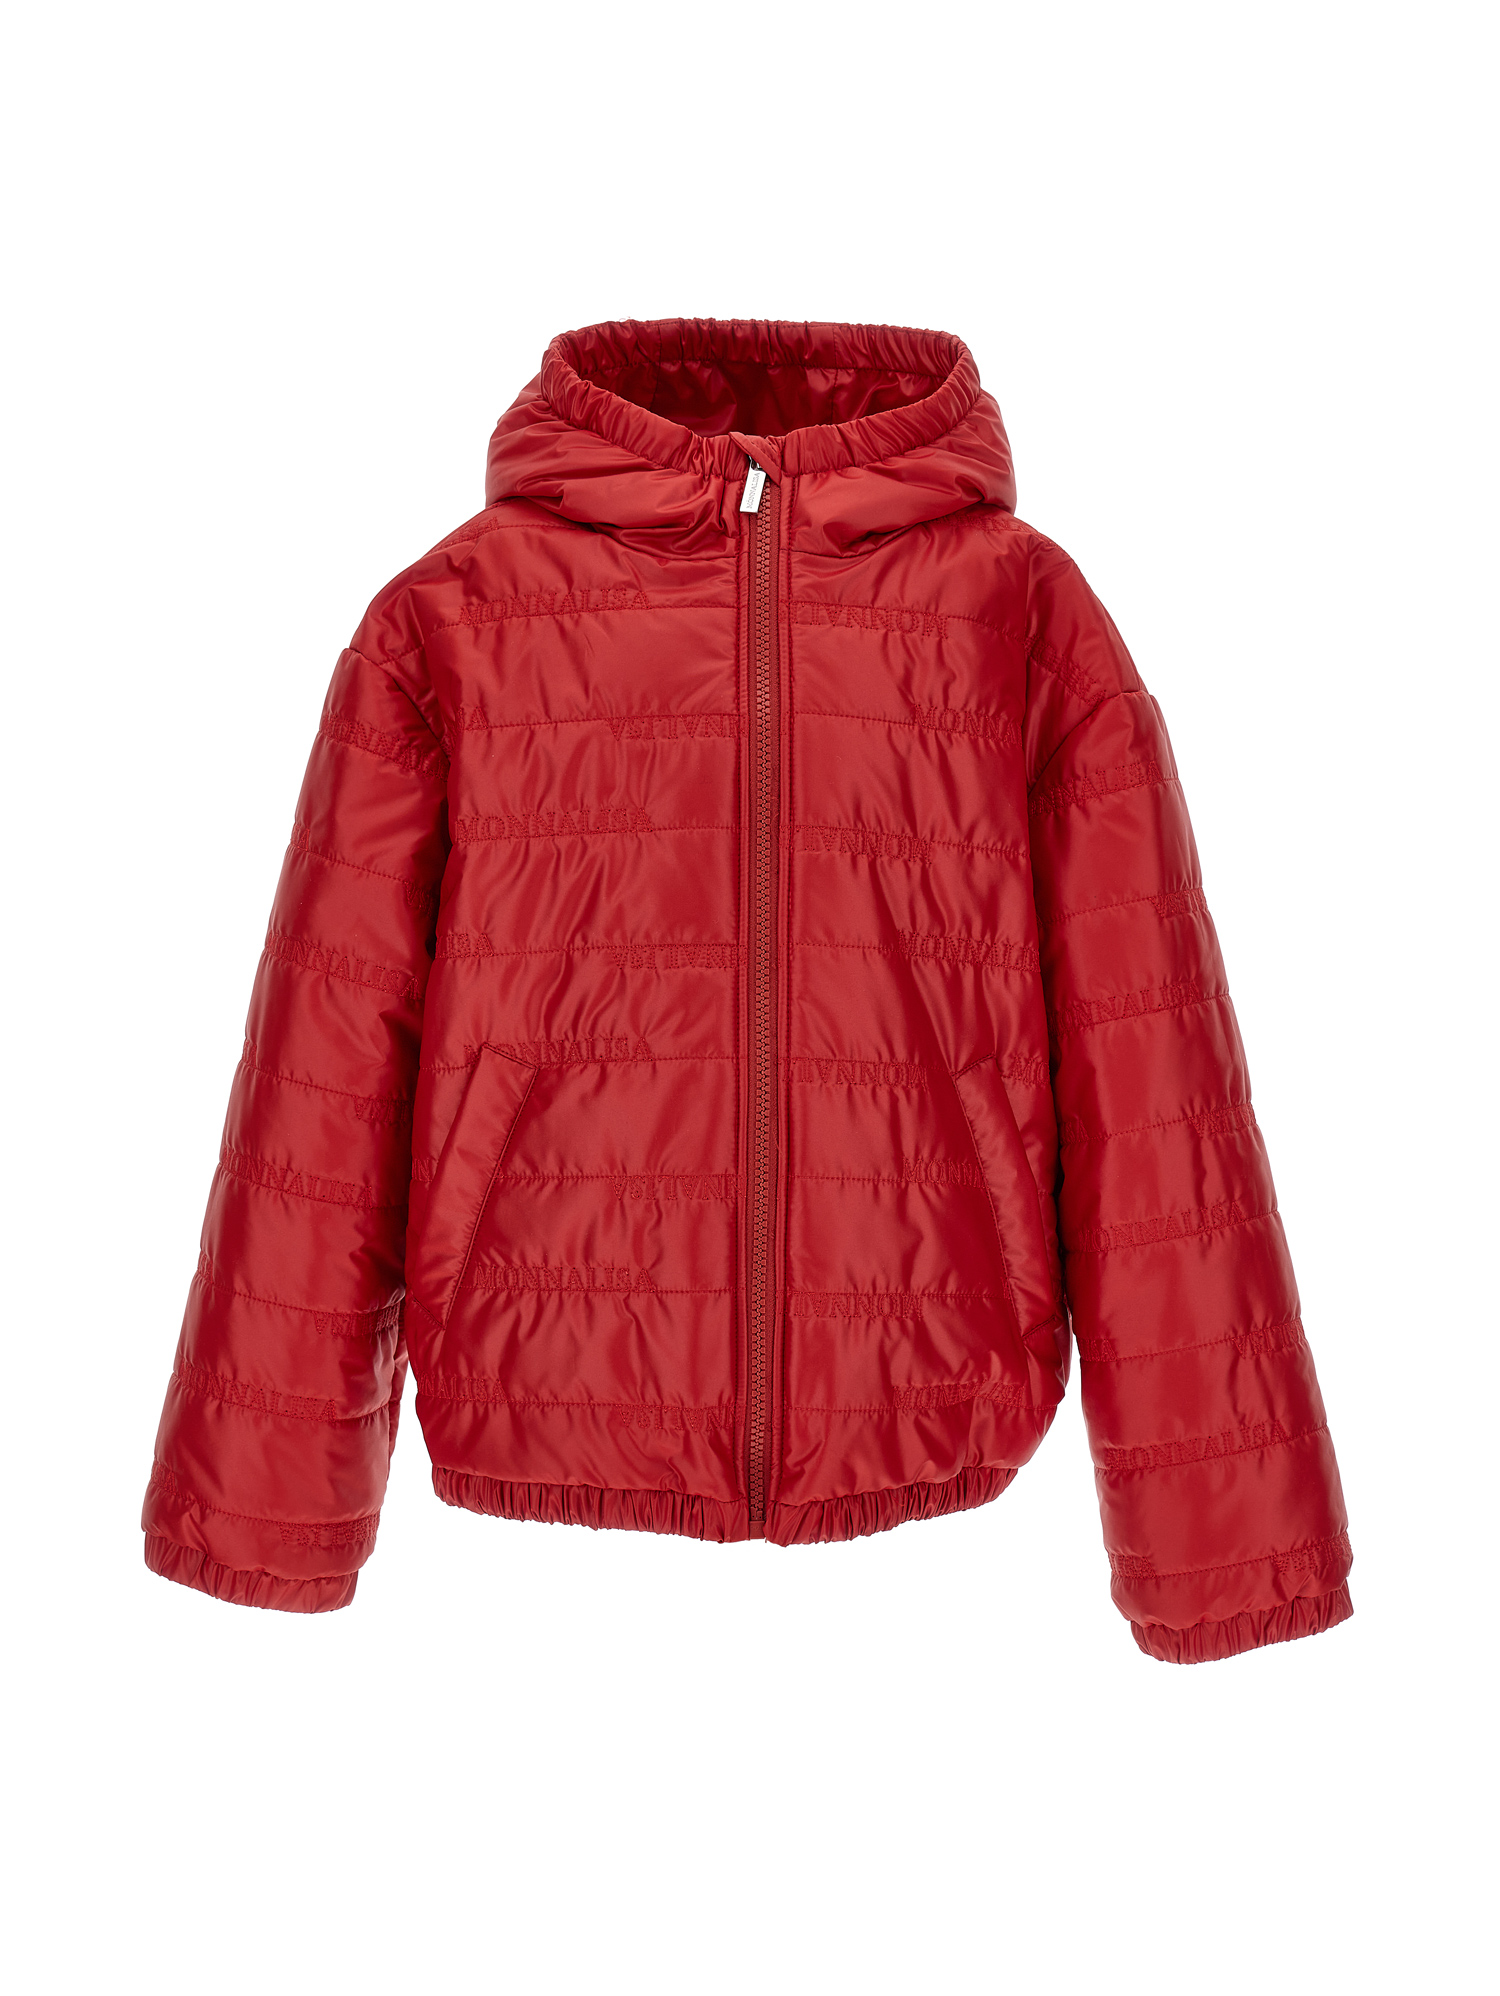 Monnalisa Quilted Extralight Jacket In Red